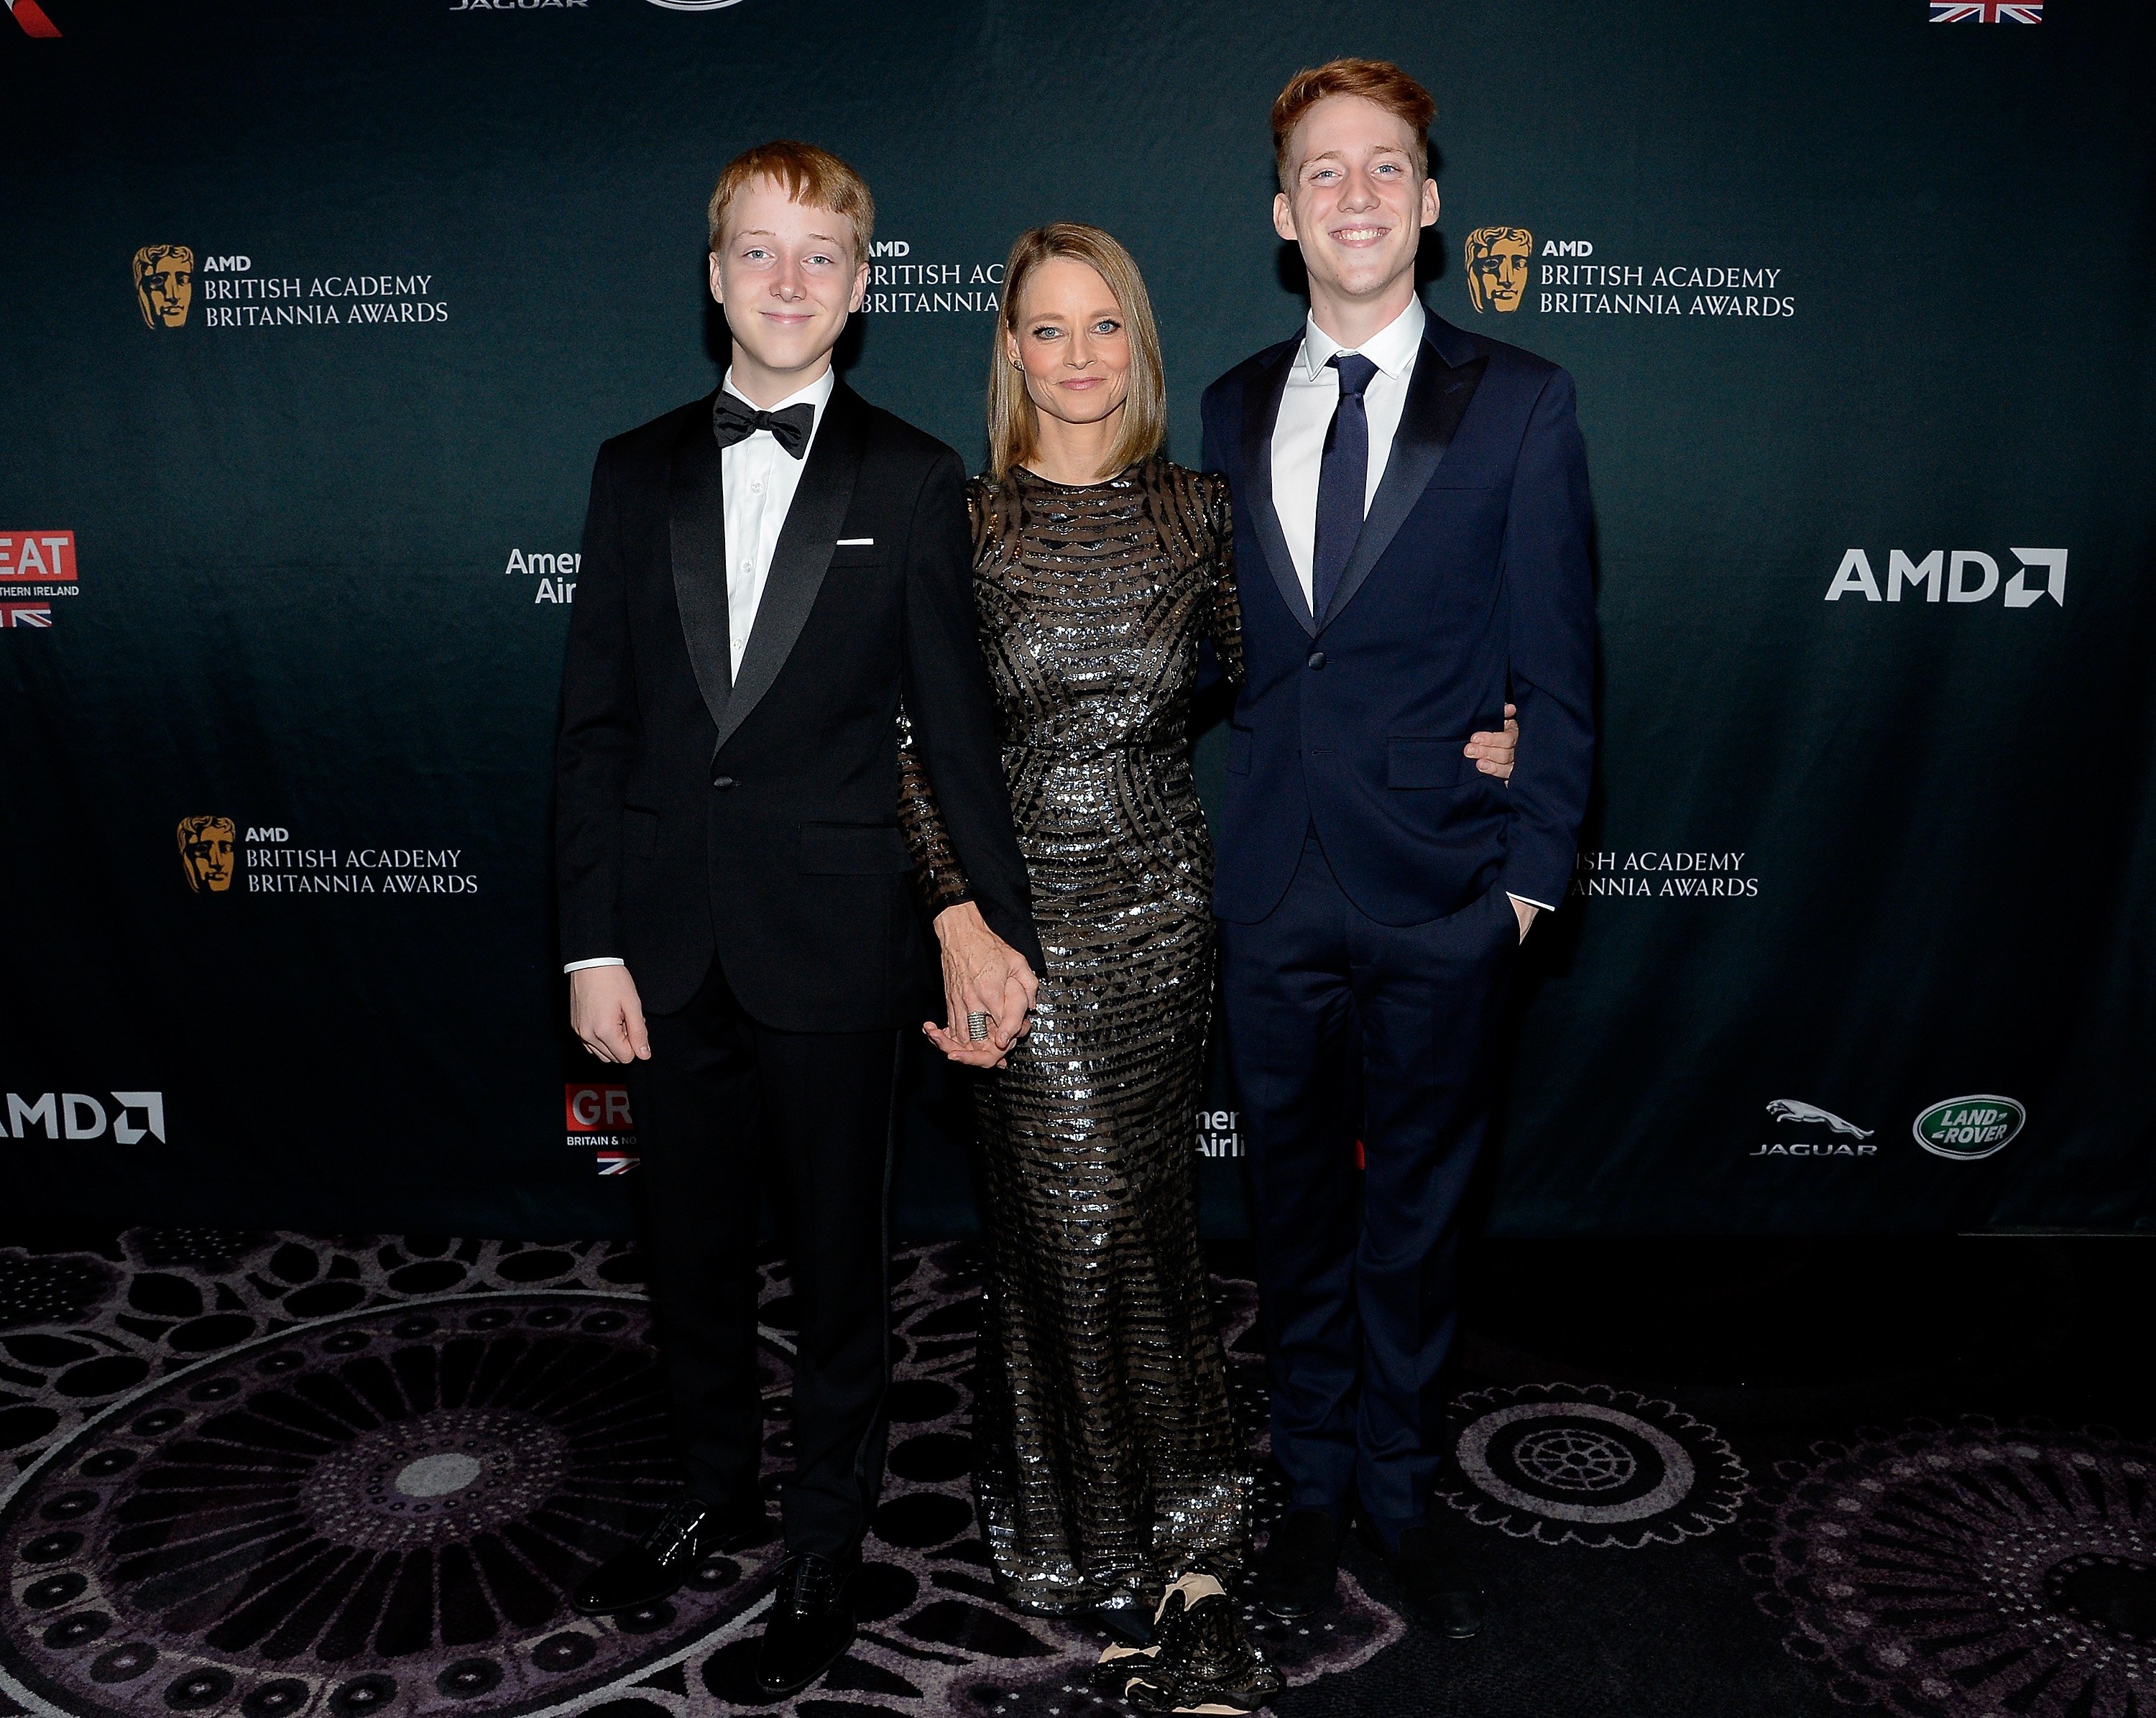 Kit Bernard Foster, Jodie Foster, and Charles Bernard Foster at the 2016 AMD British Academy Britannia Awards on October 28, 2016, in Beverly Hills | Source: Getty Images